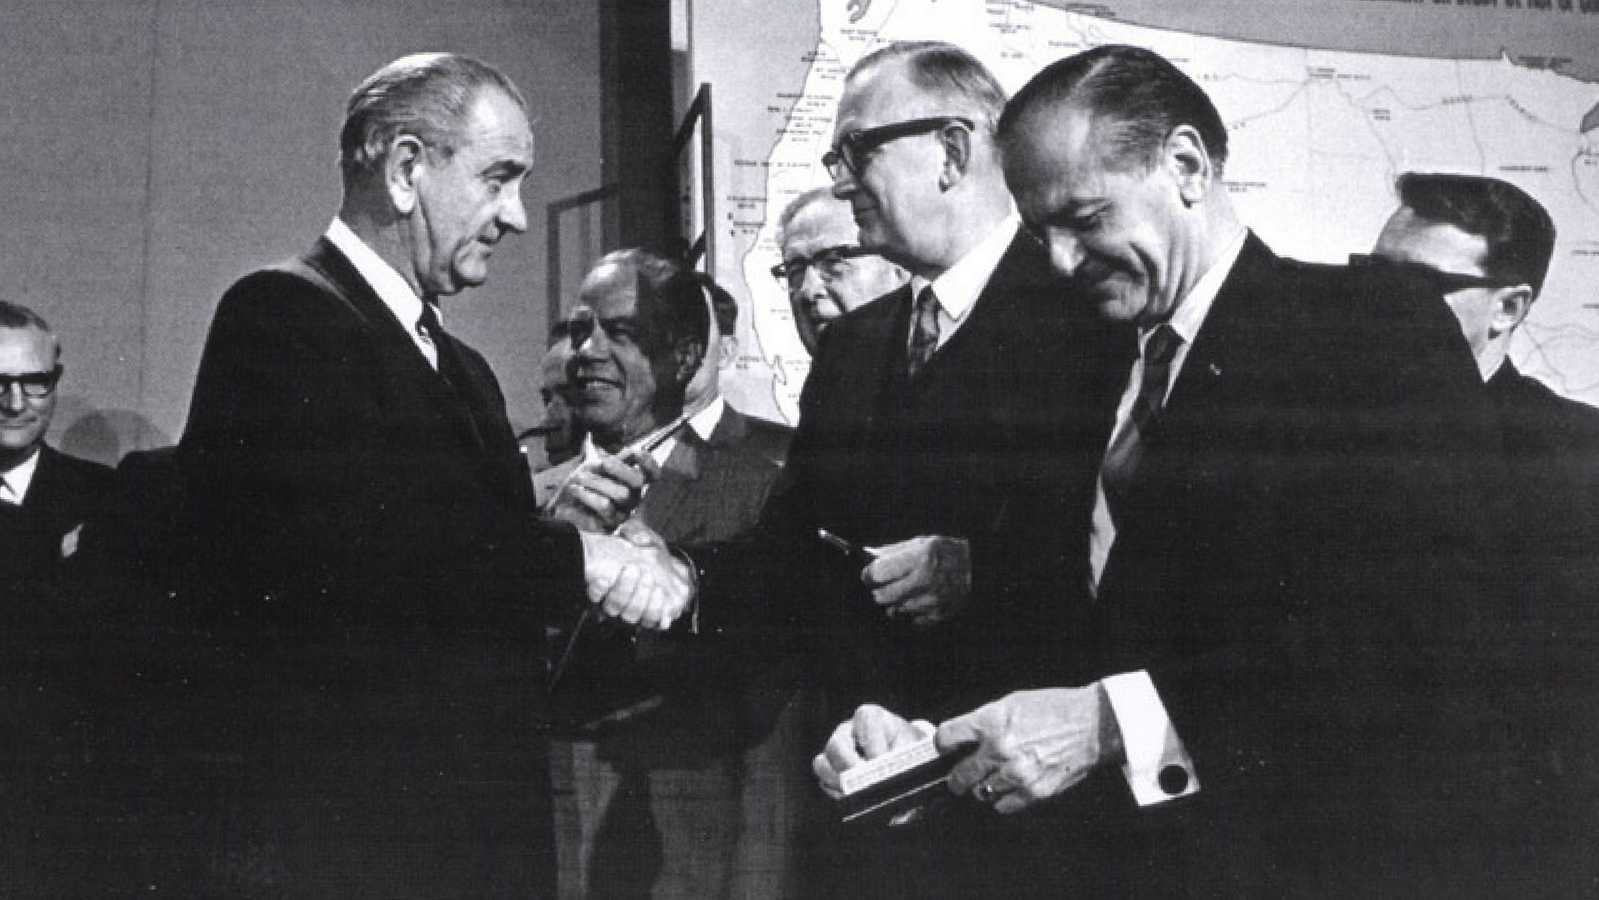 President Johnson and Saylor commemorating the passage of the National Wild and Scenic Rivers Act